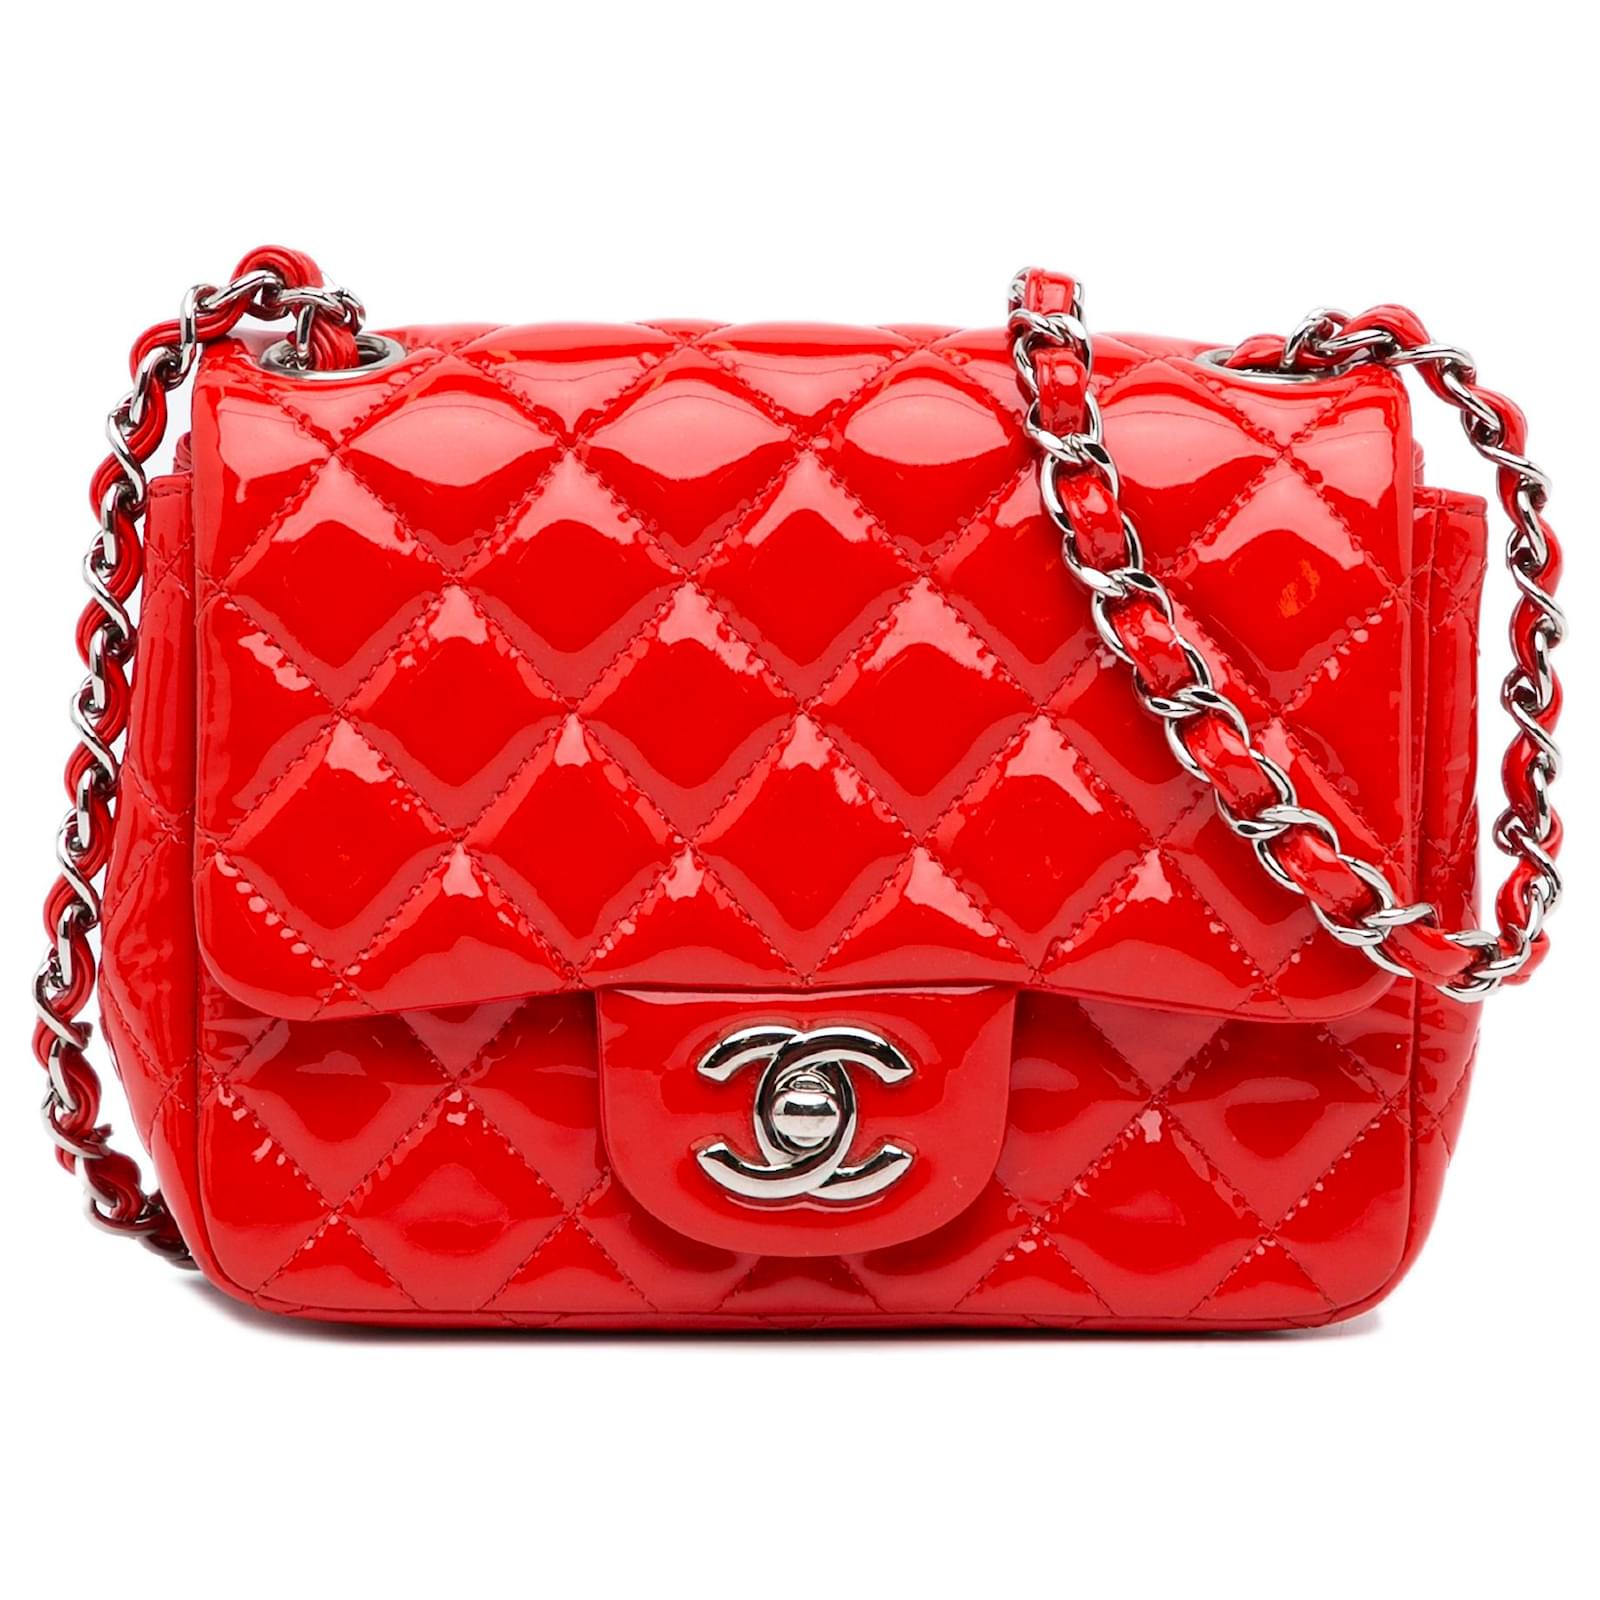 chanel red bag mini leather